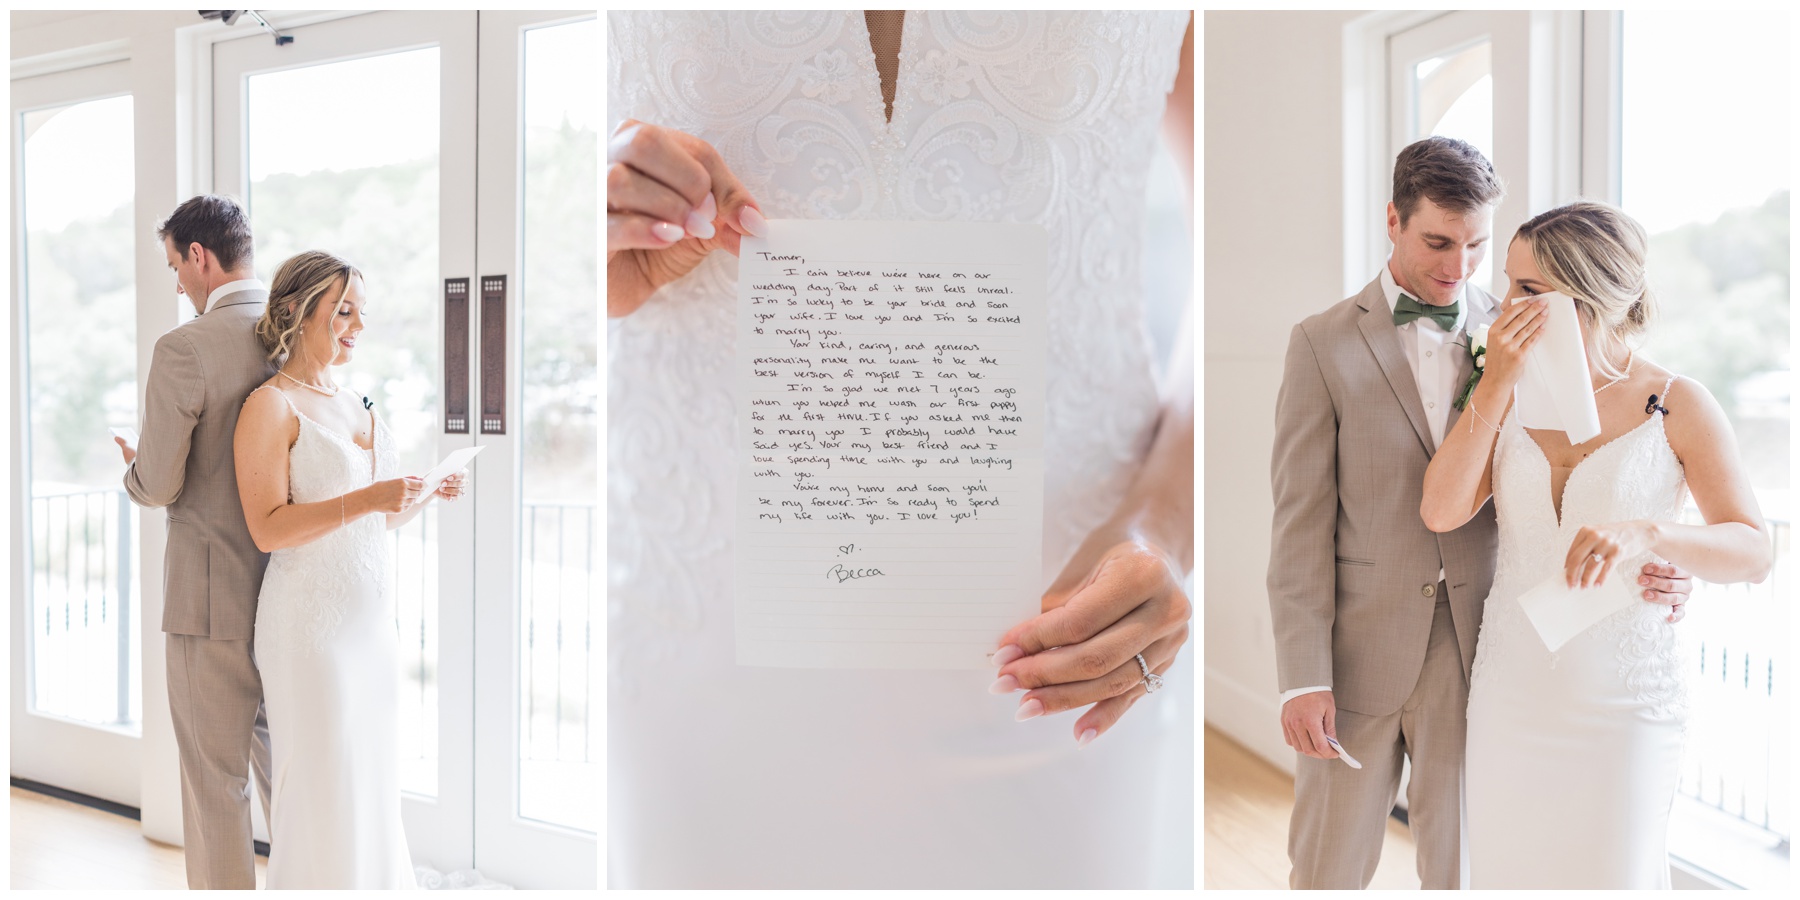 Bride and groom reading private vows before their wedding ceremony